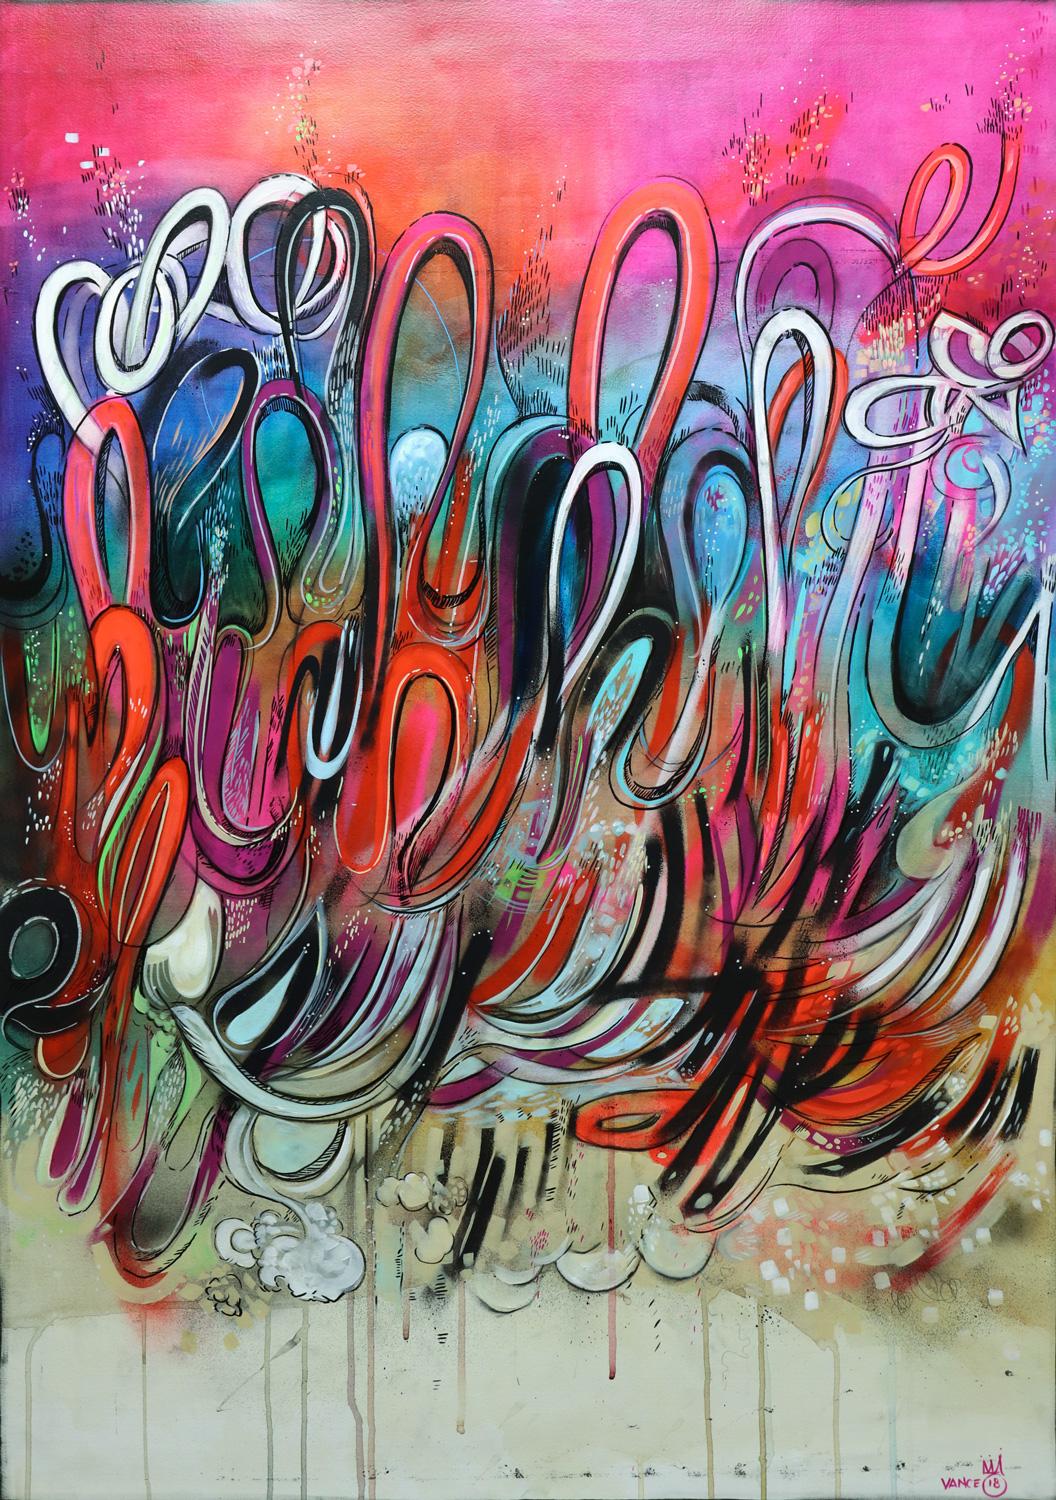 Chris Vance  Abstract Painting - Watching Over (Abstract painting on paper with bright colored graffiti shapes)